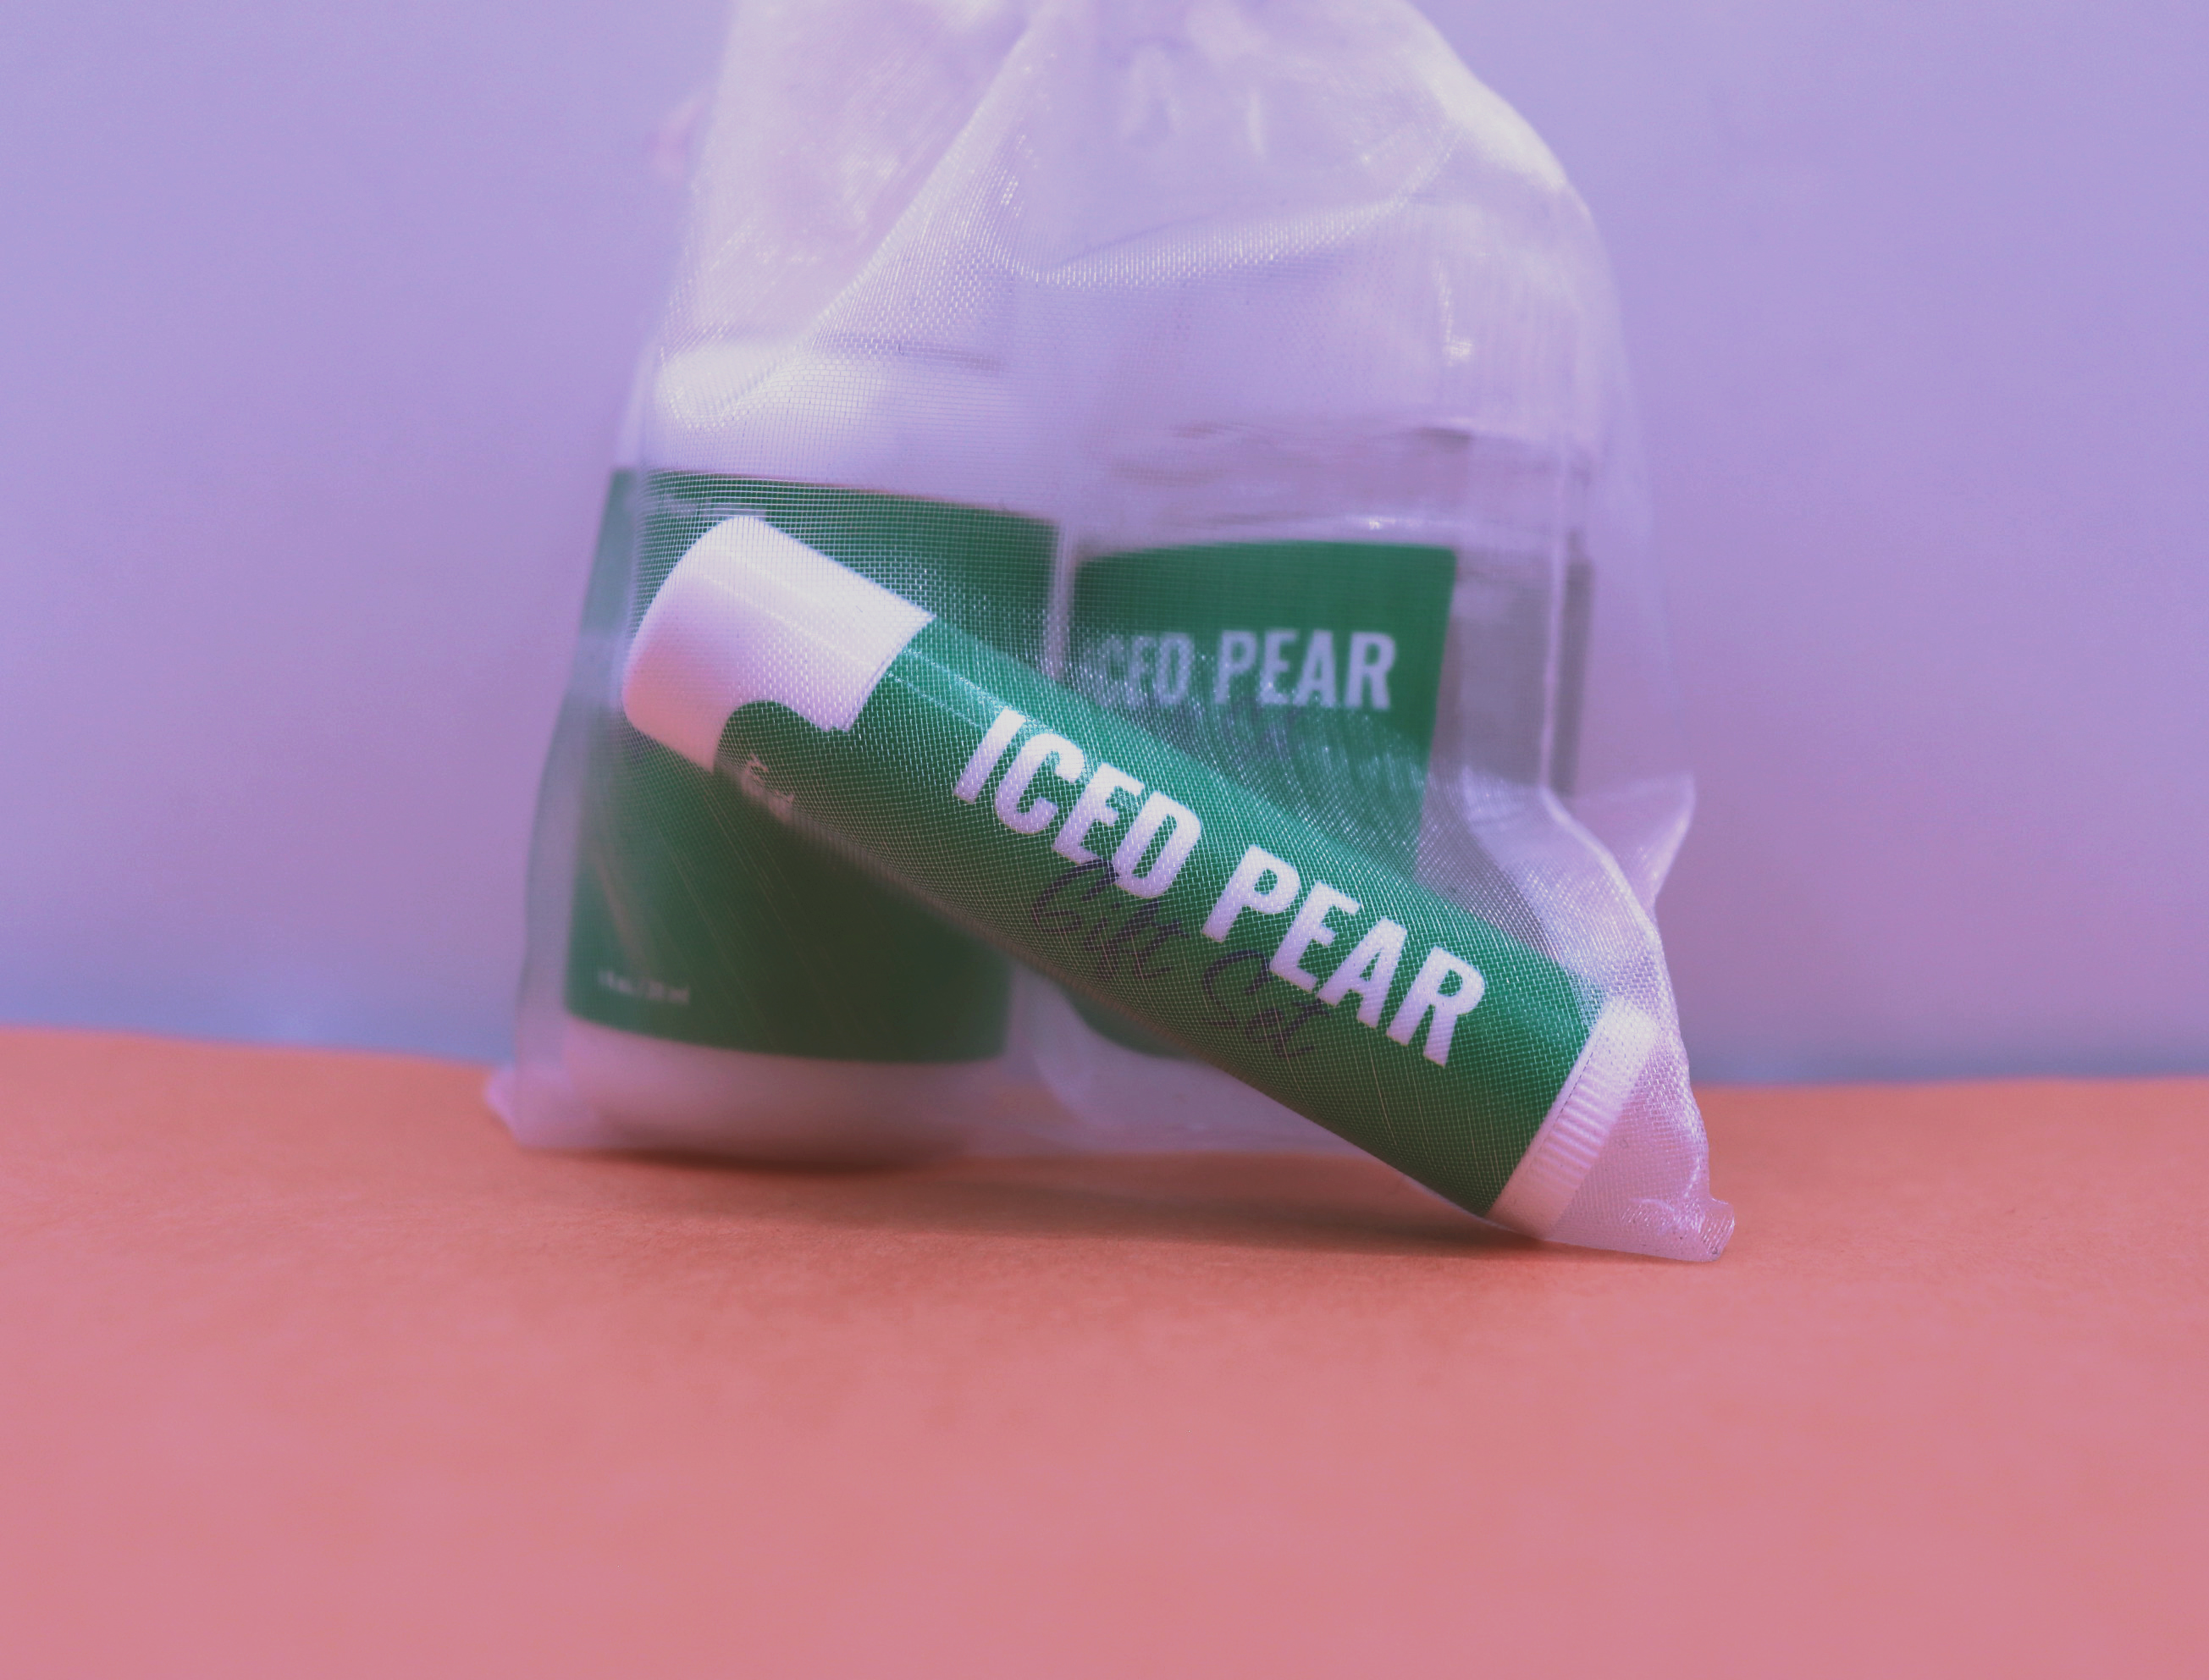 iced pear gift set 5